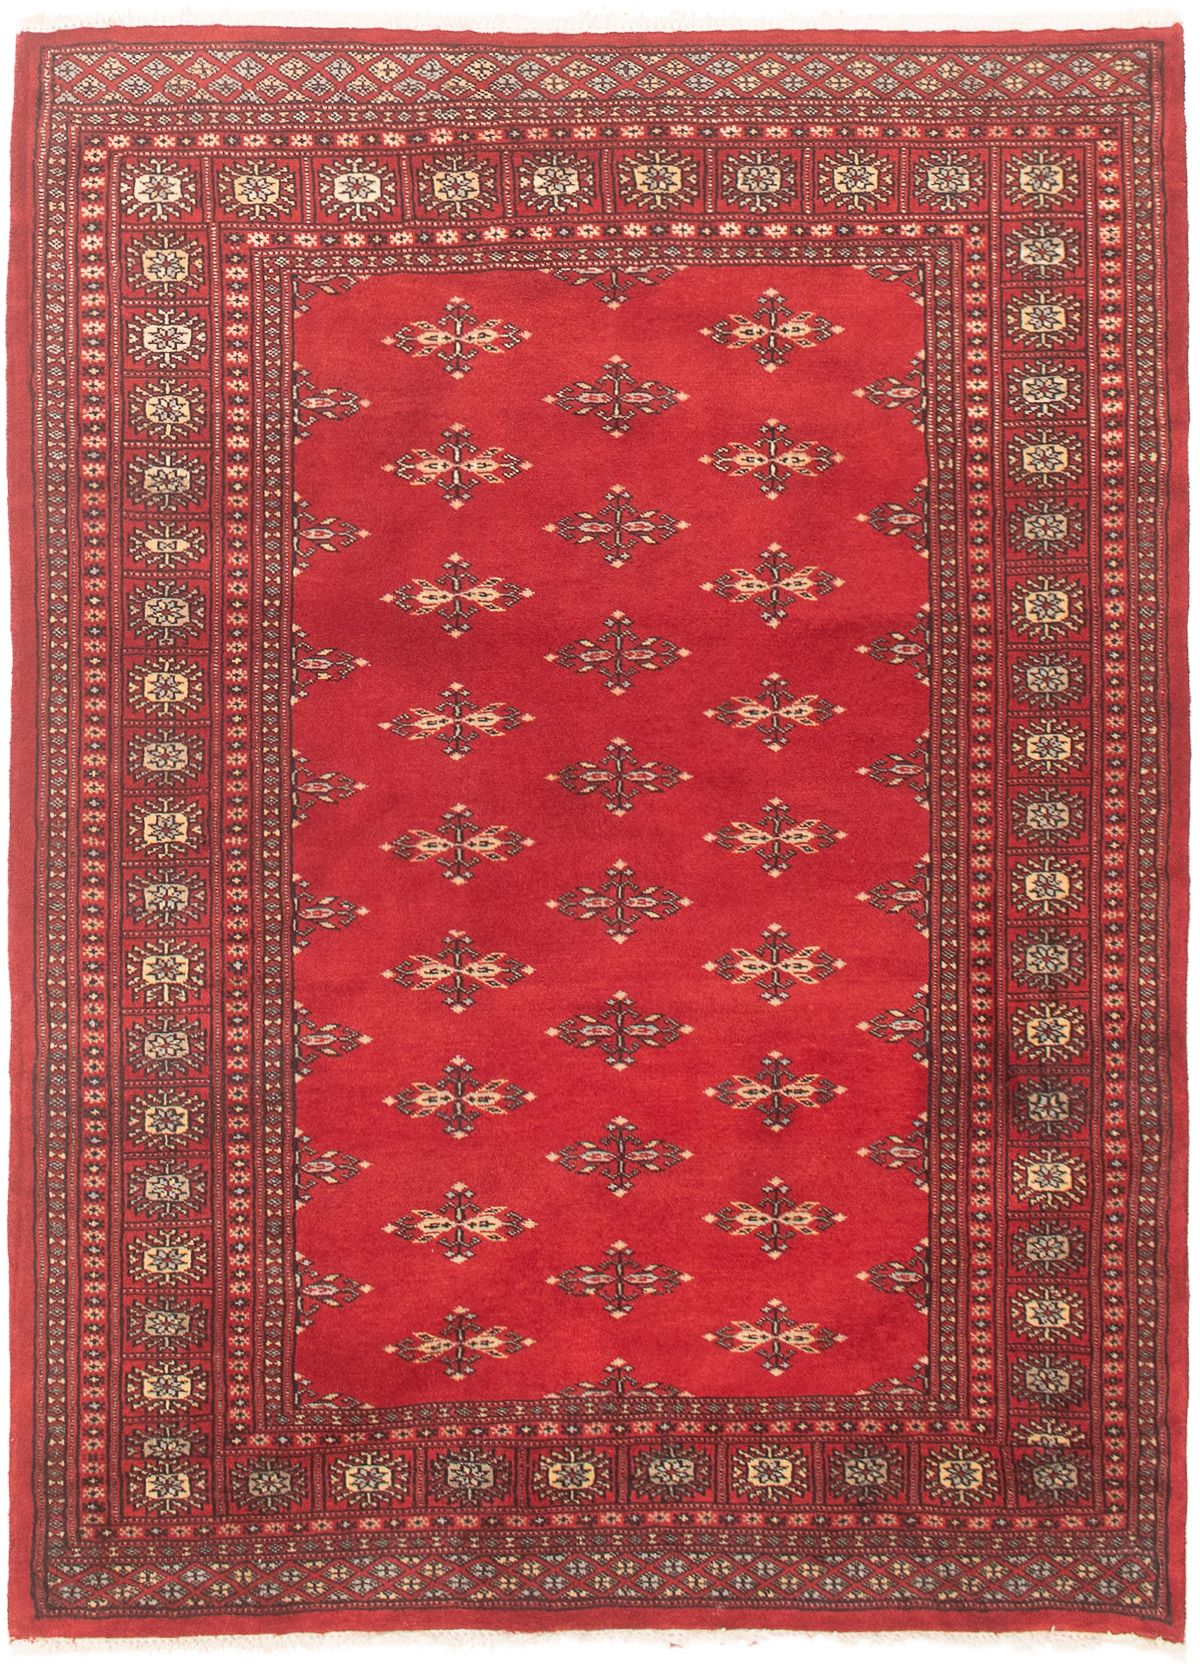 Hand-knotted Finest Peshawar Bokhara Red Wool Rug 4'2" x 5'8"  Size: 4'2" x 5'8"  